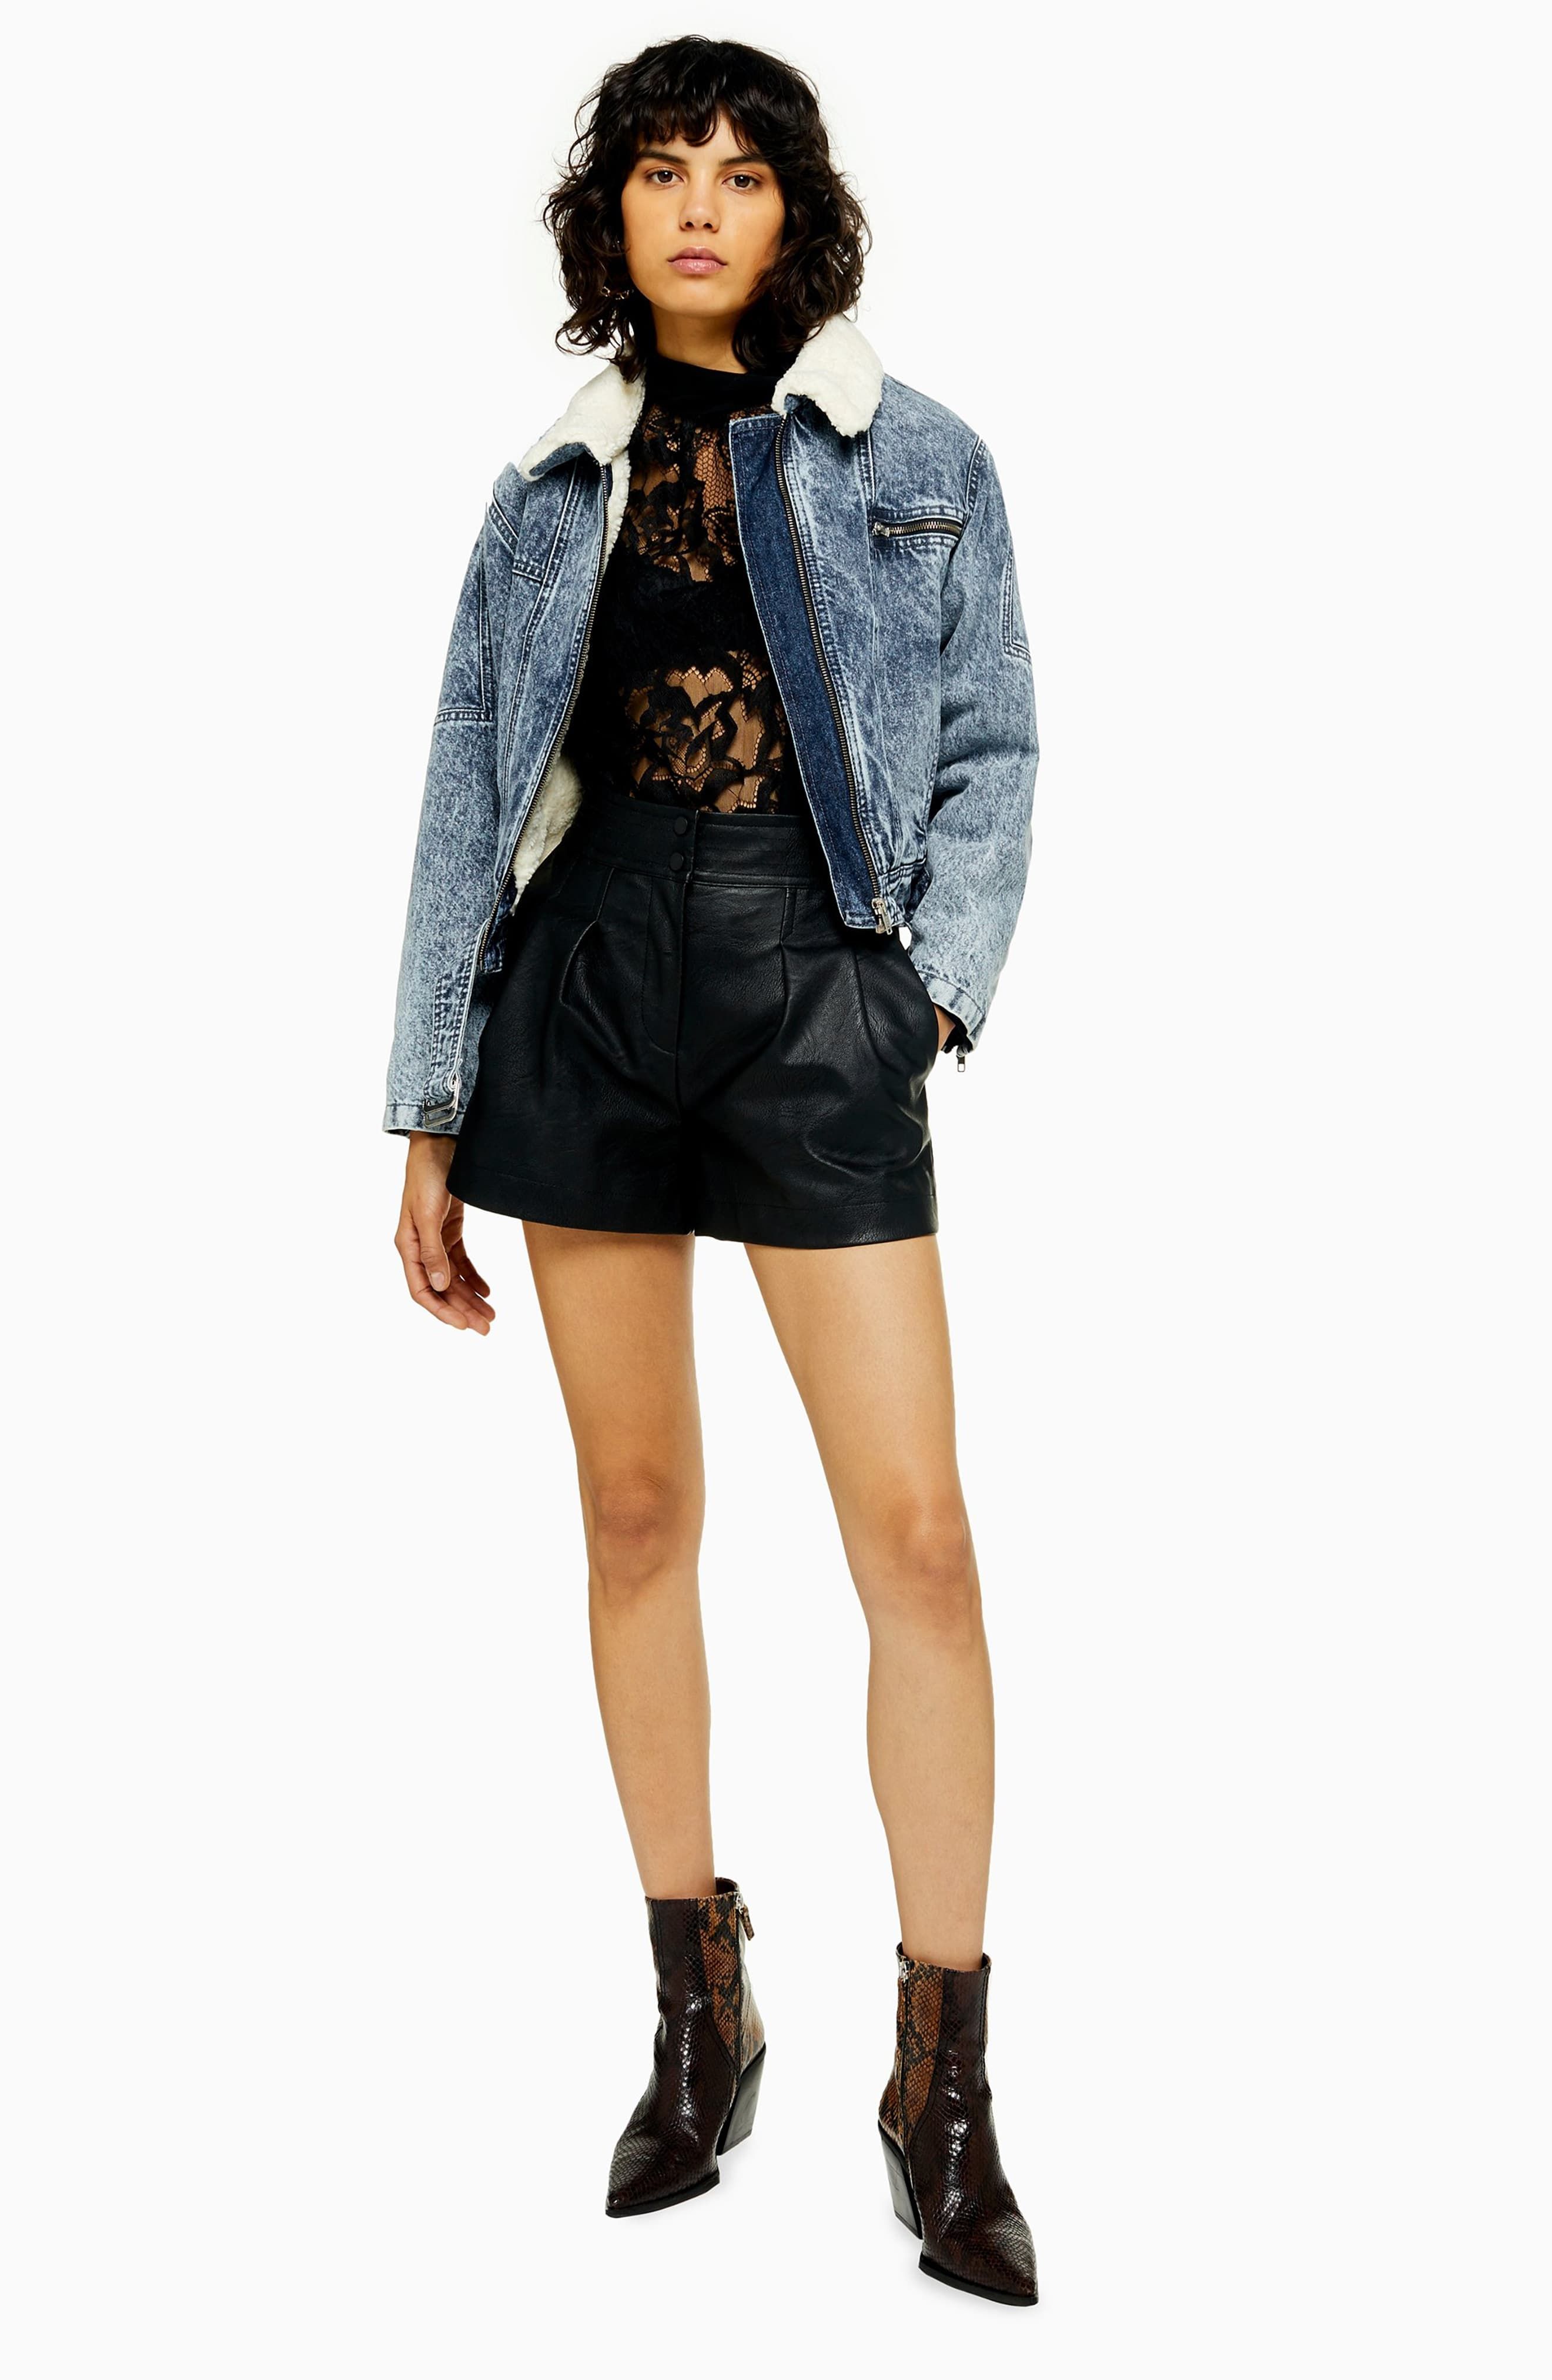 14 Denim Jacket Outfit Ideas That Are Stylish as Hell